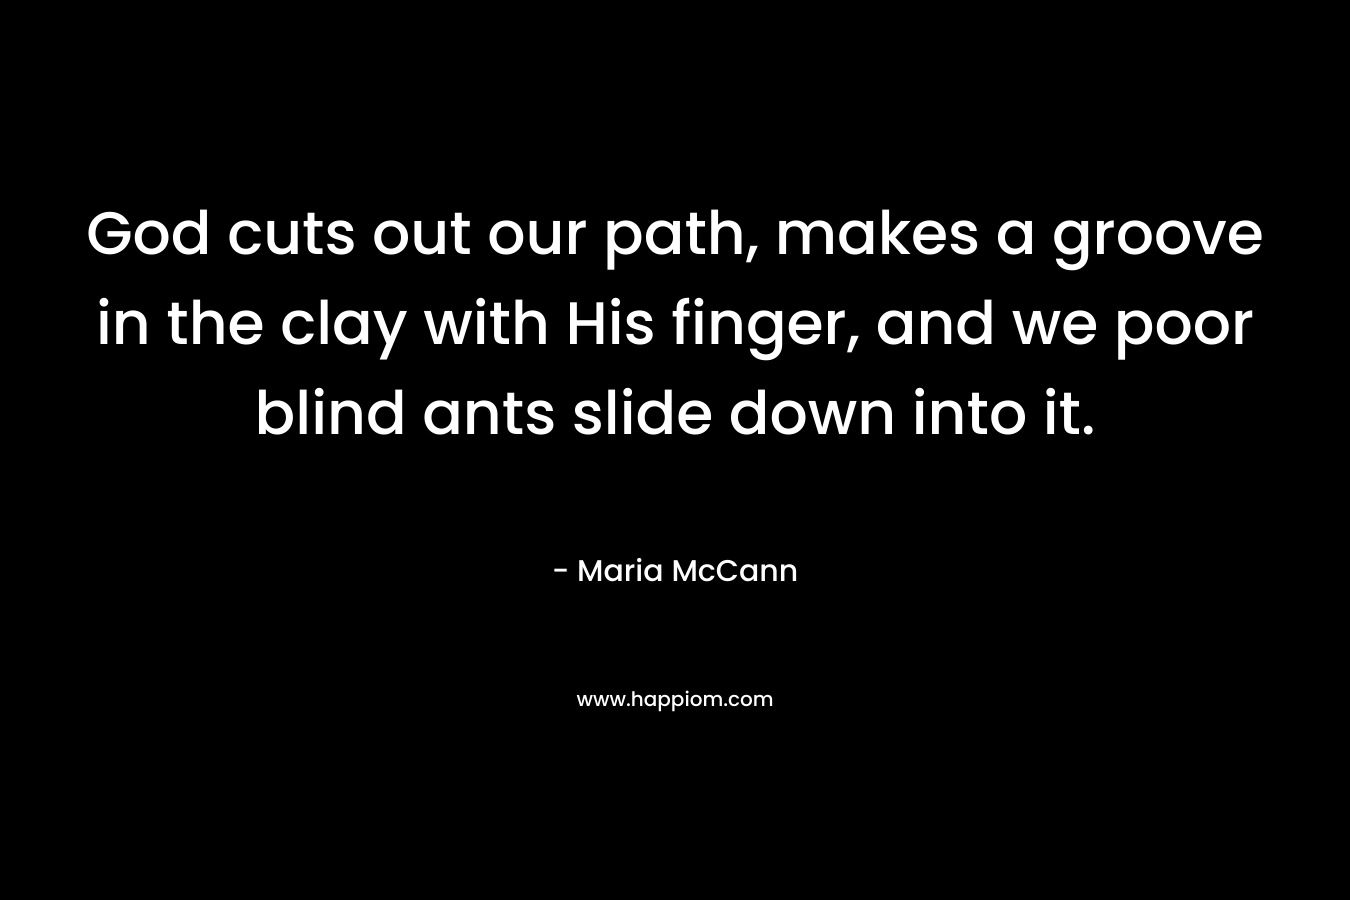 God cuts out our path, makes a groove in the clay with His finger, and we poor blind ants slide down into it.